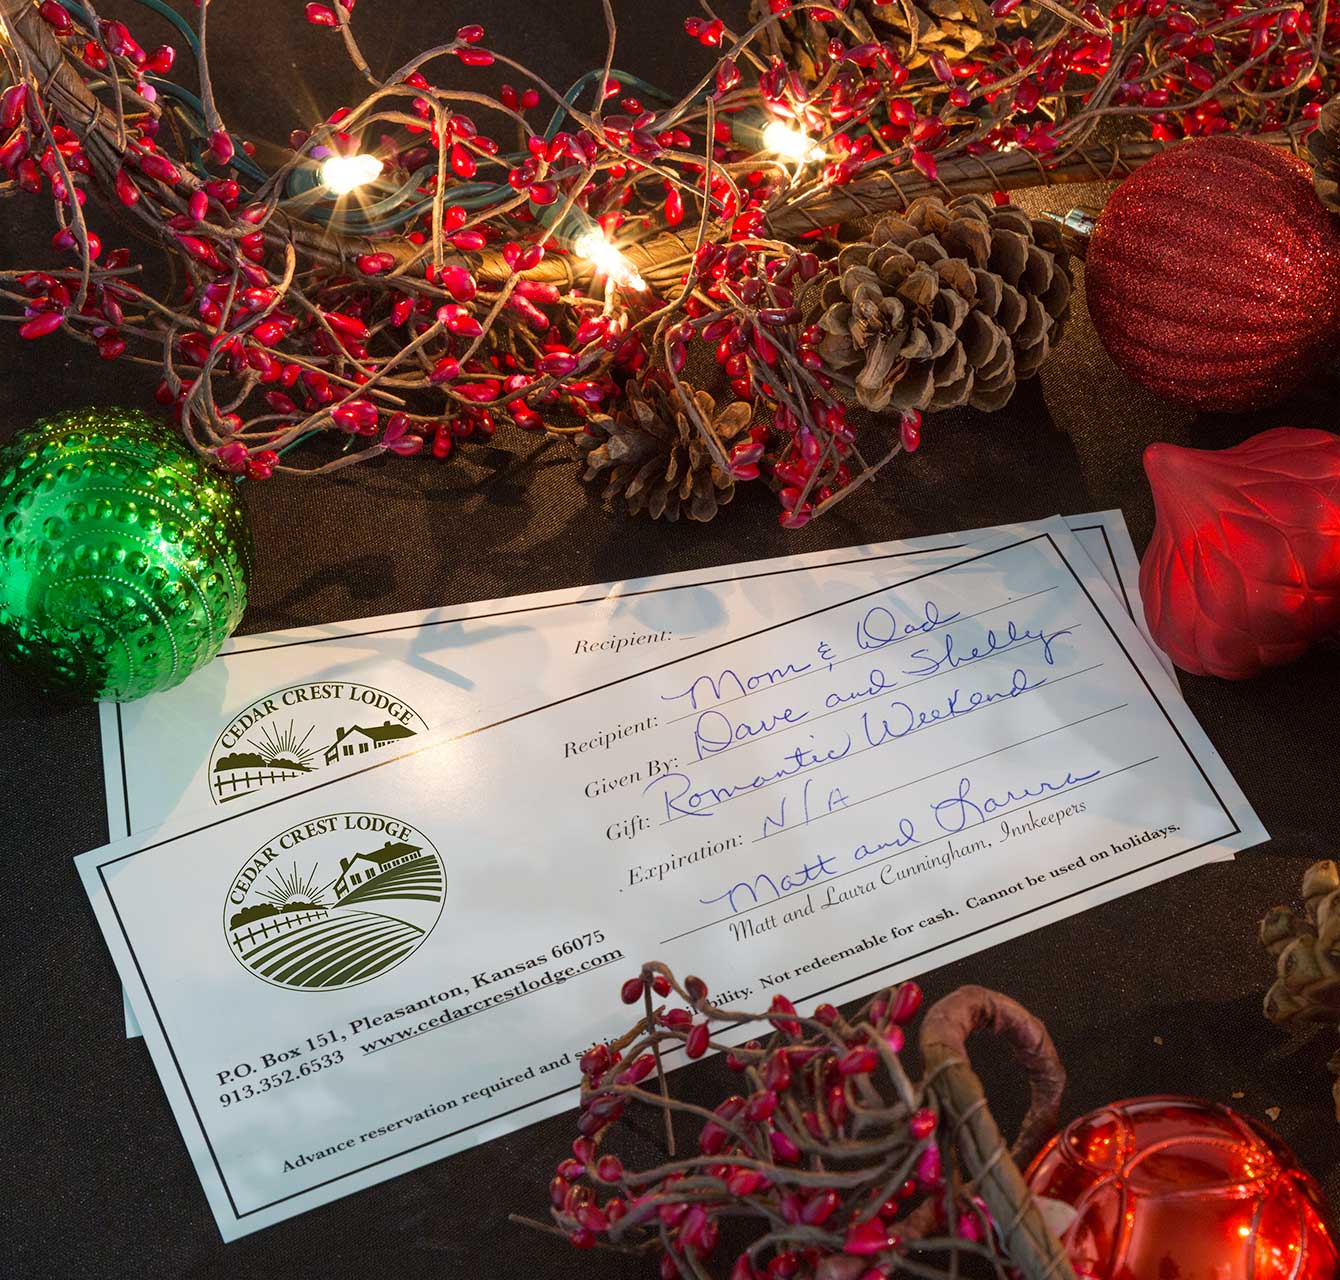 Cedar Crest Lodge gift certificates with Christmas decorations